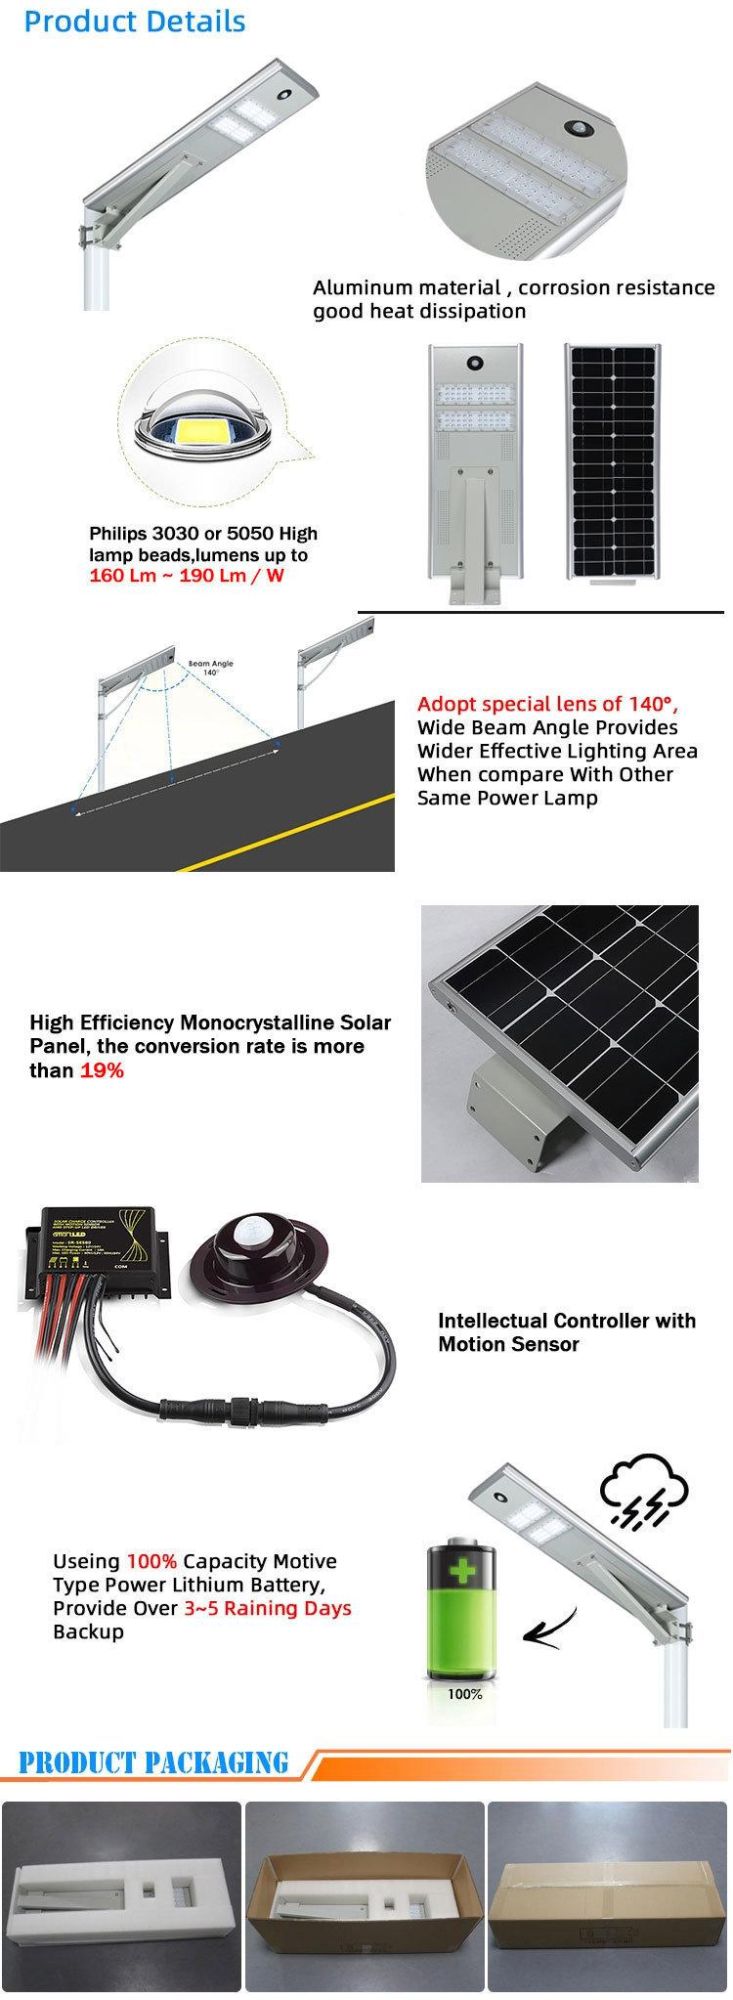 30W LED All in One Solar Street Light with Portable Sunlight Panel Power From China